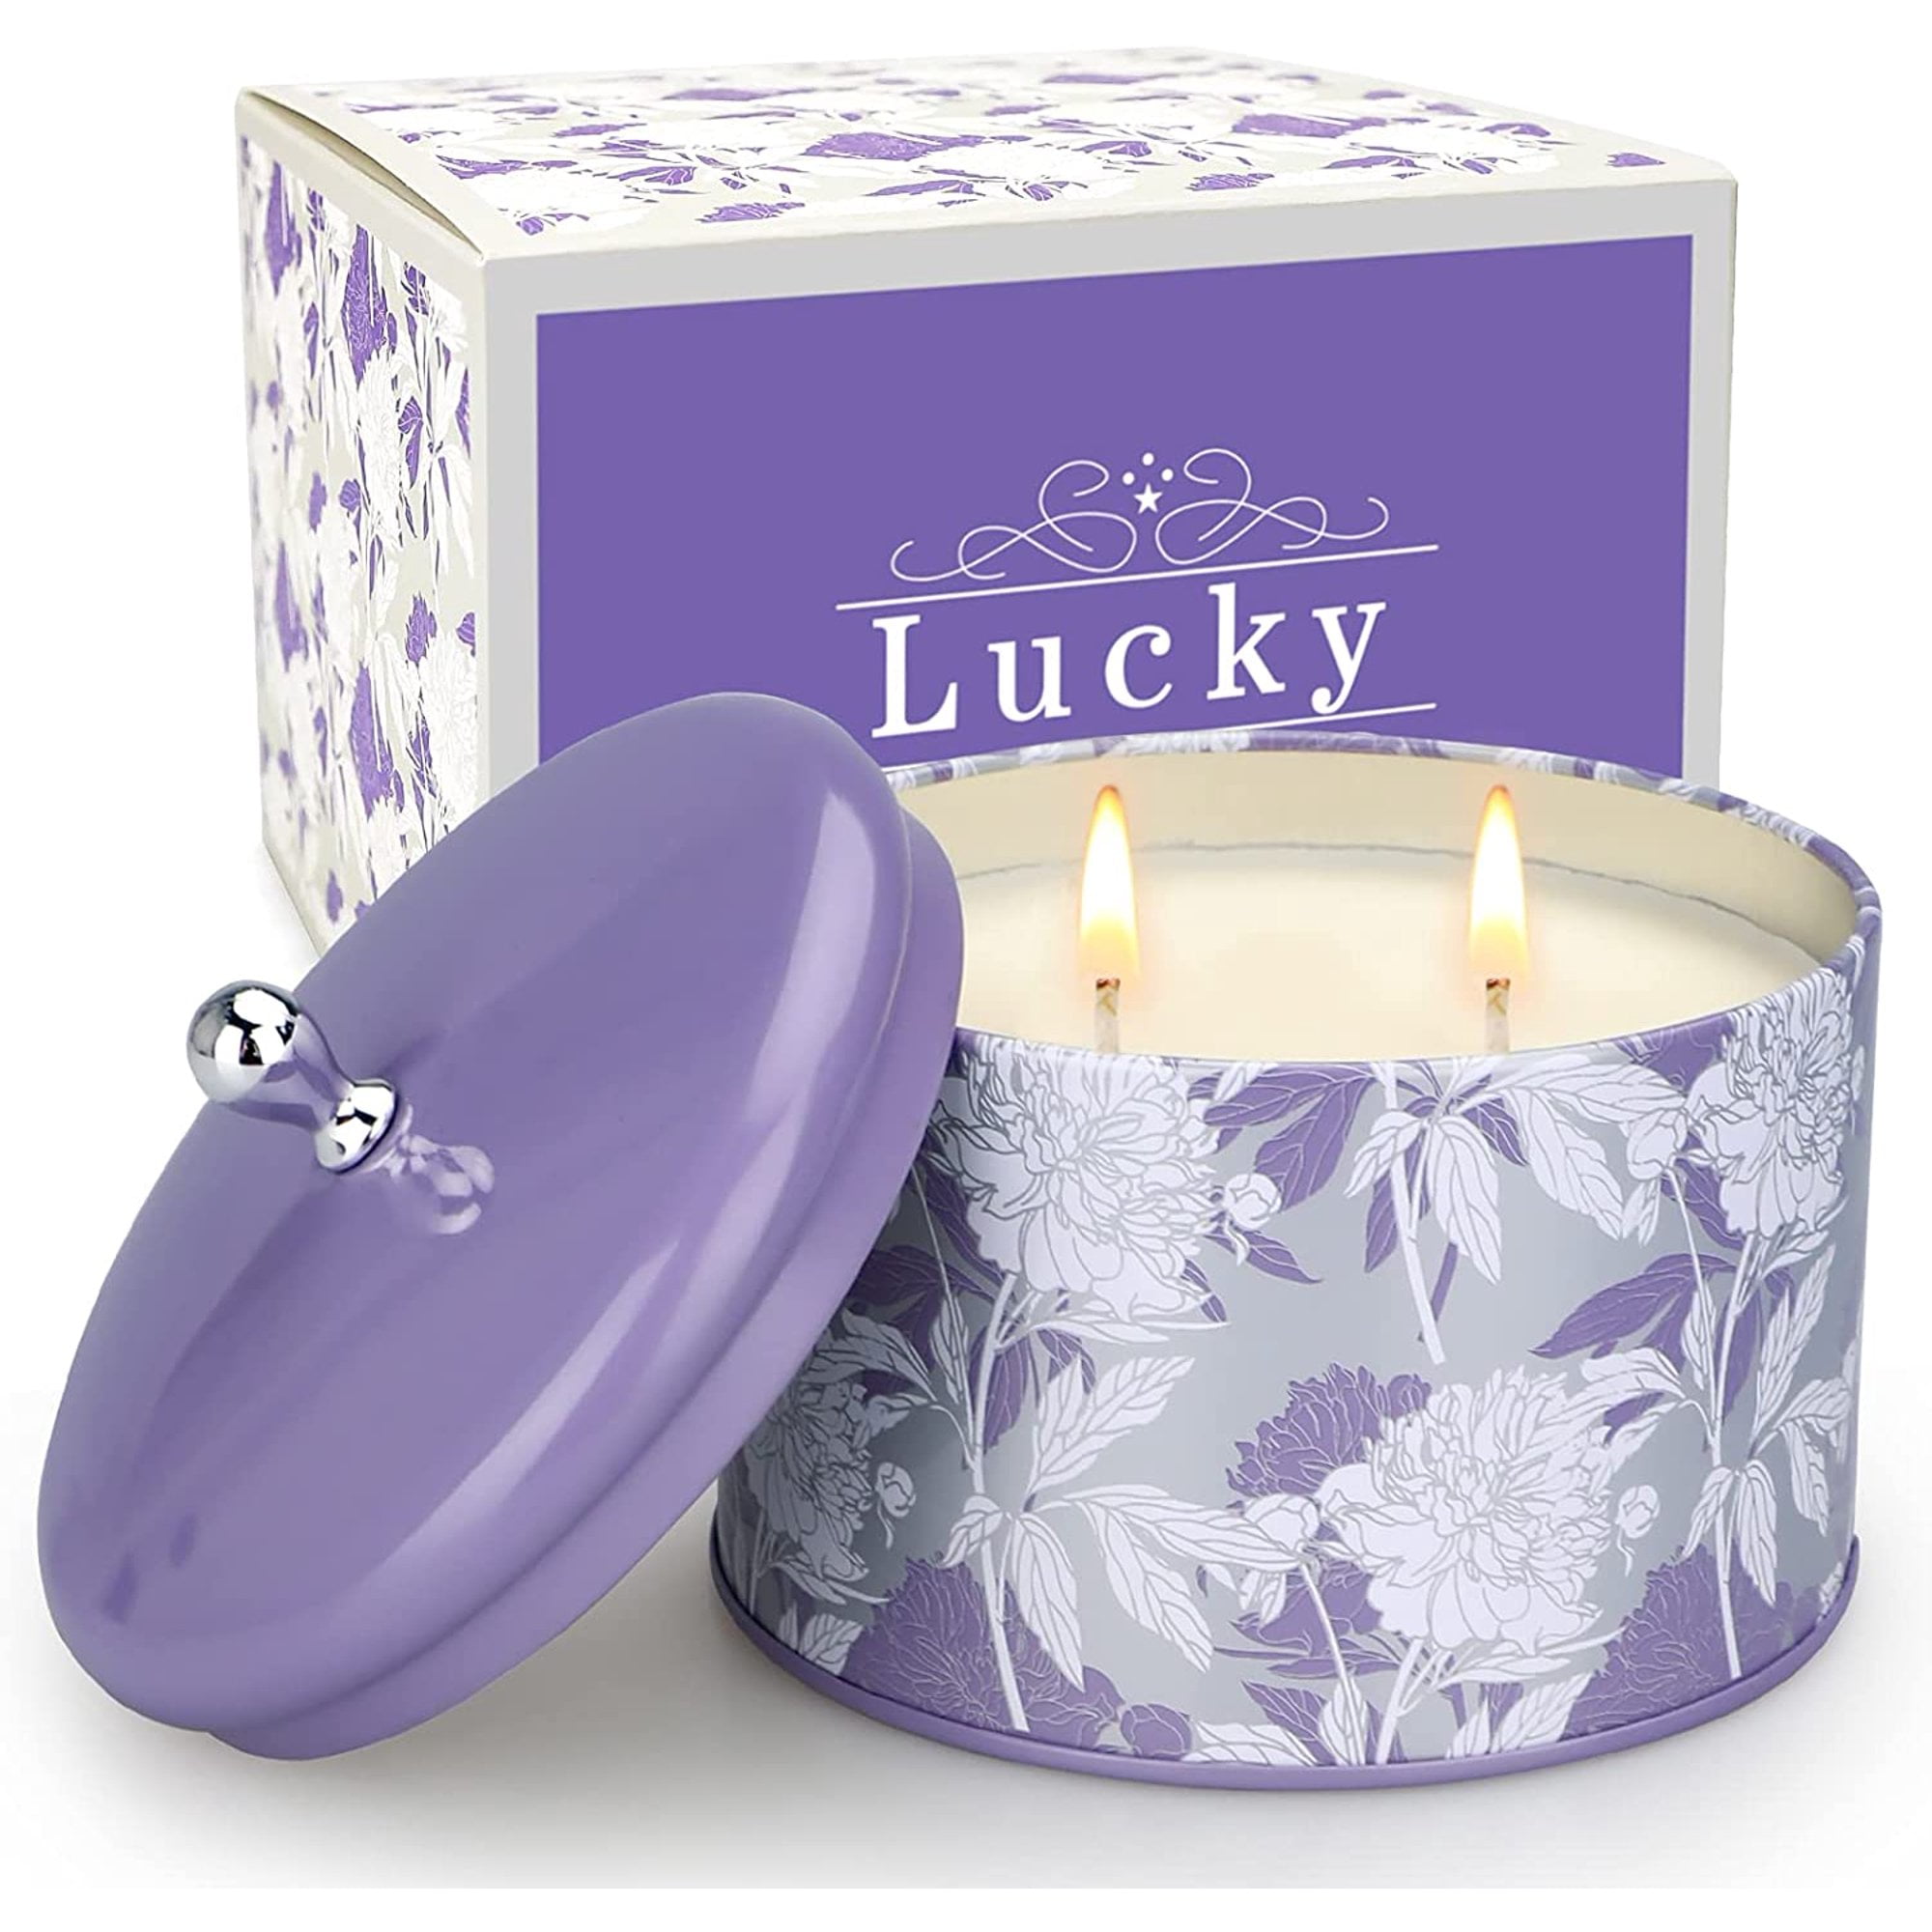 GEMTEND Lavender Scented Candles - Thinking of You Gifts for Women